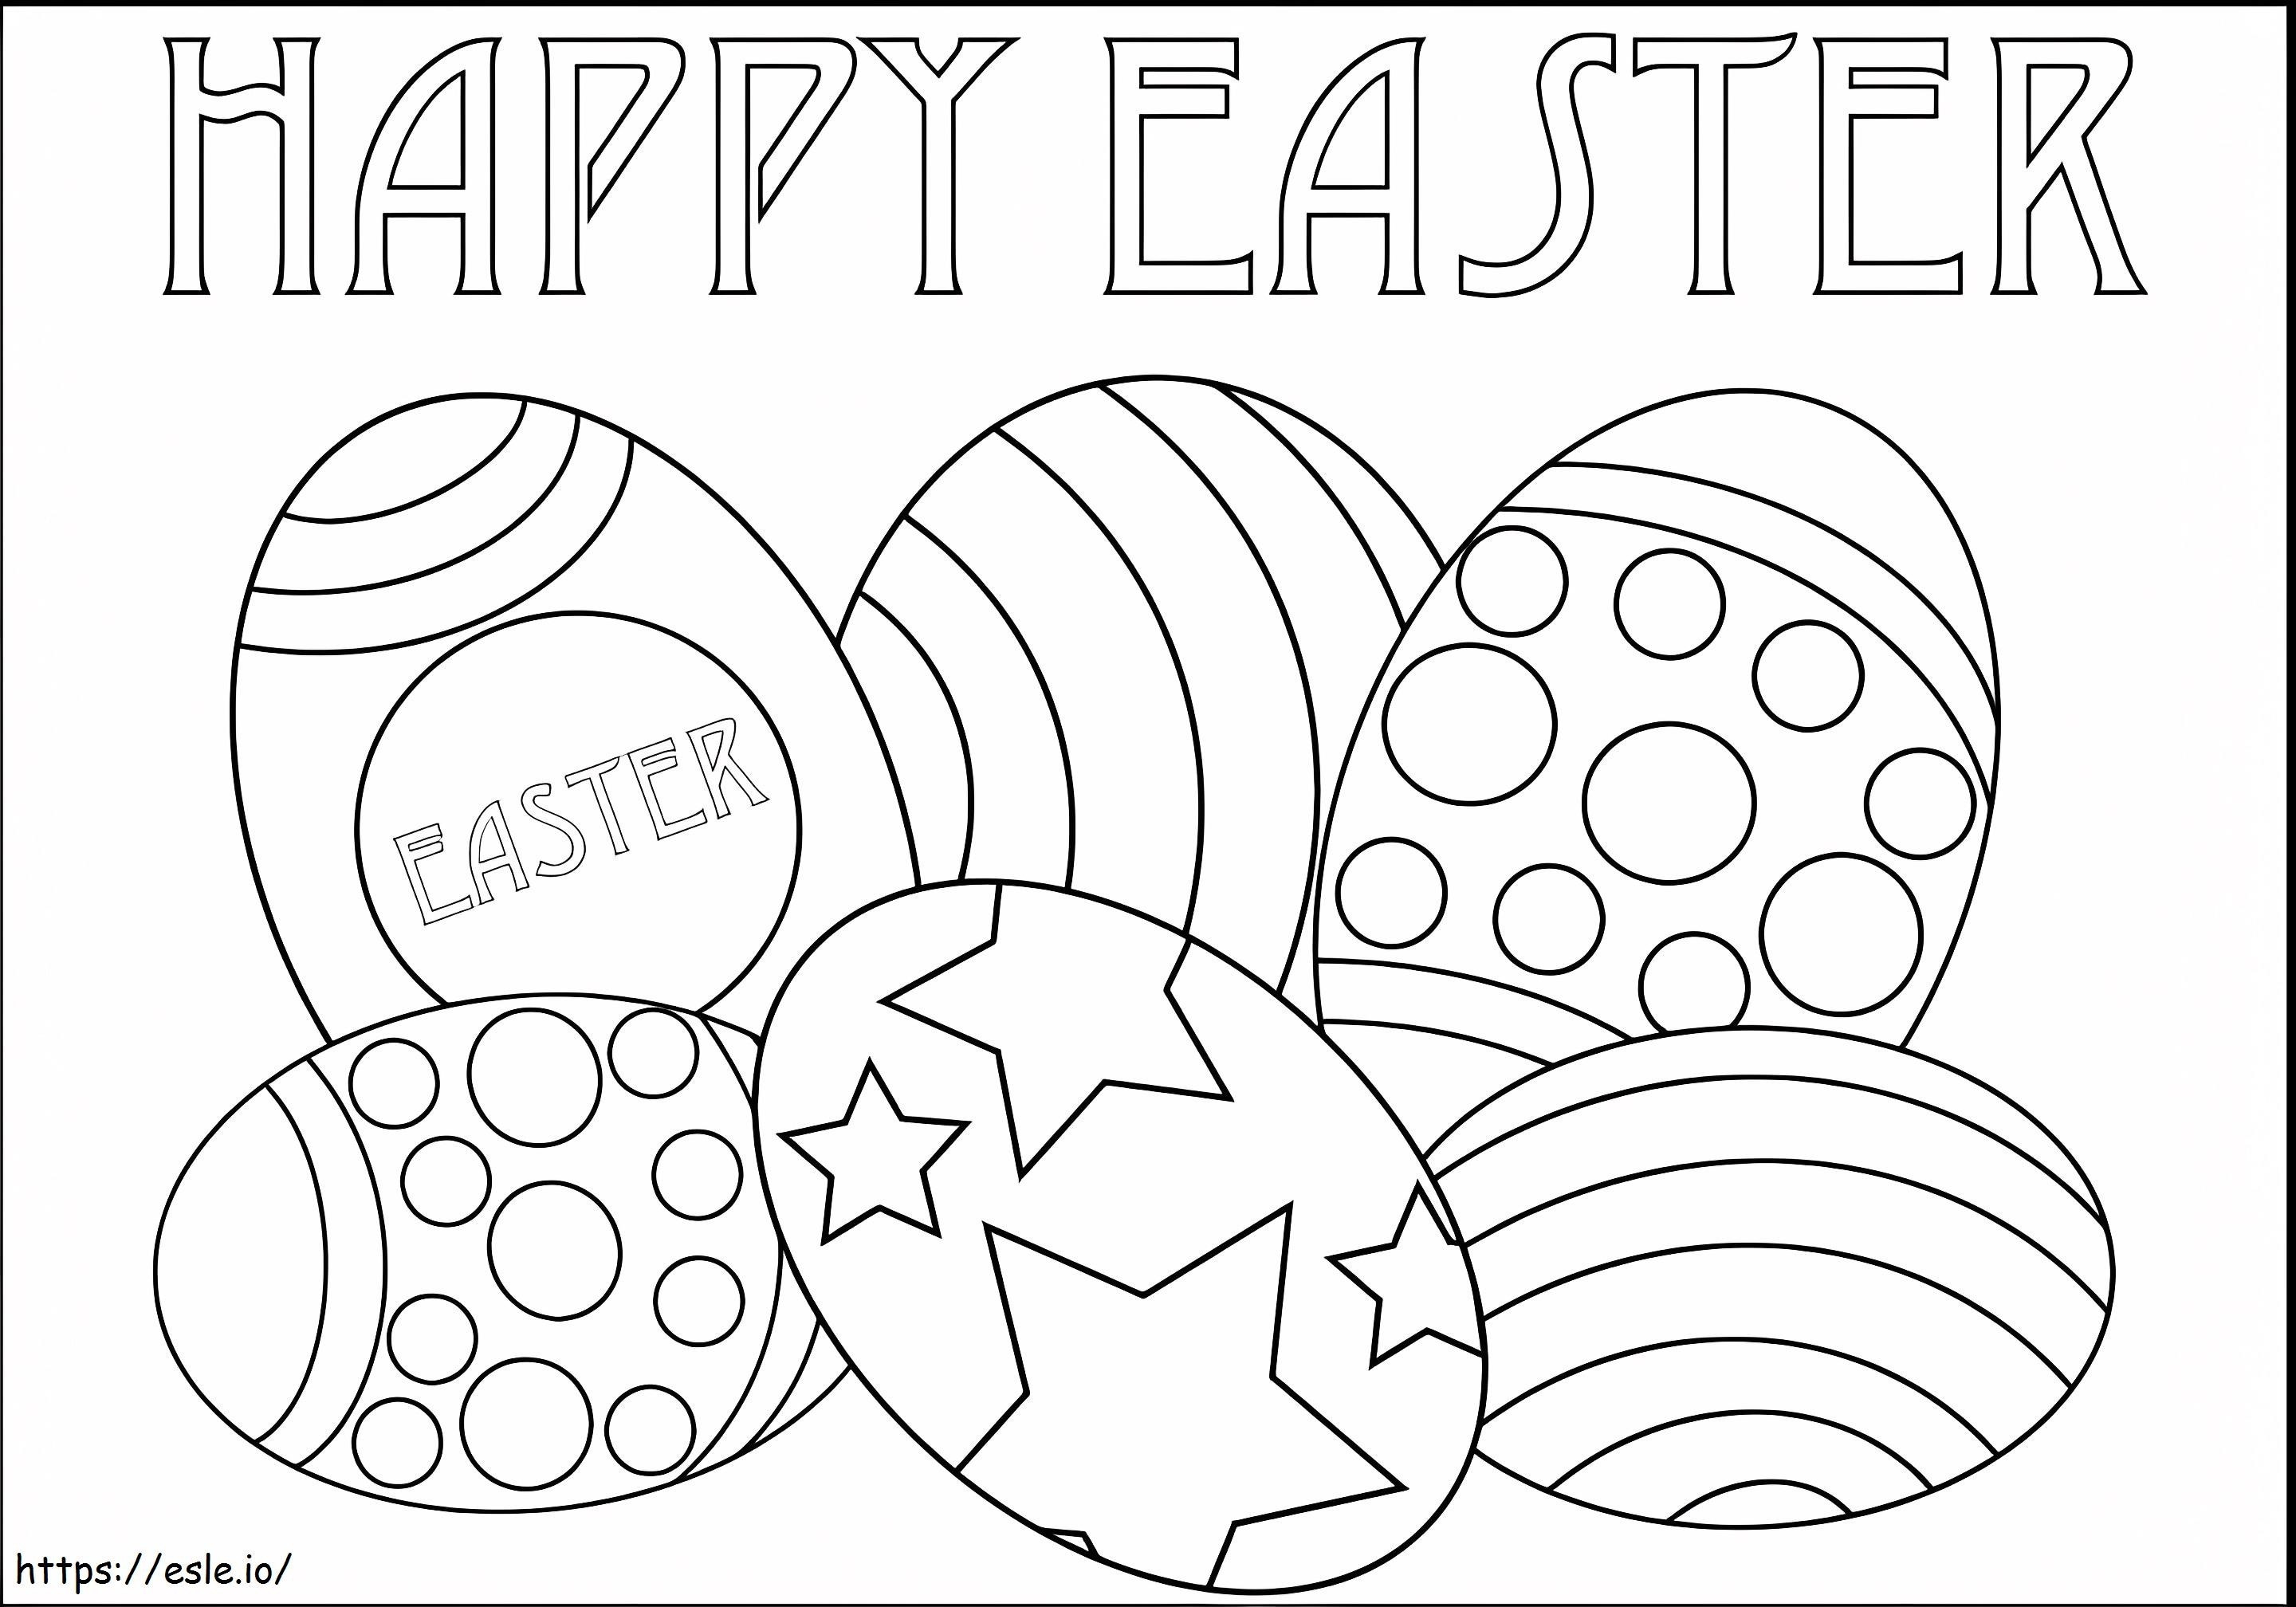 Happy Easter Egg coloring page